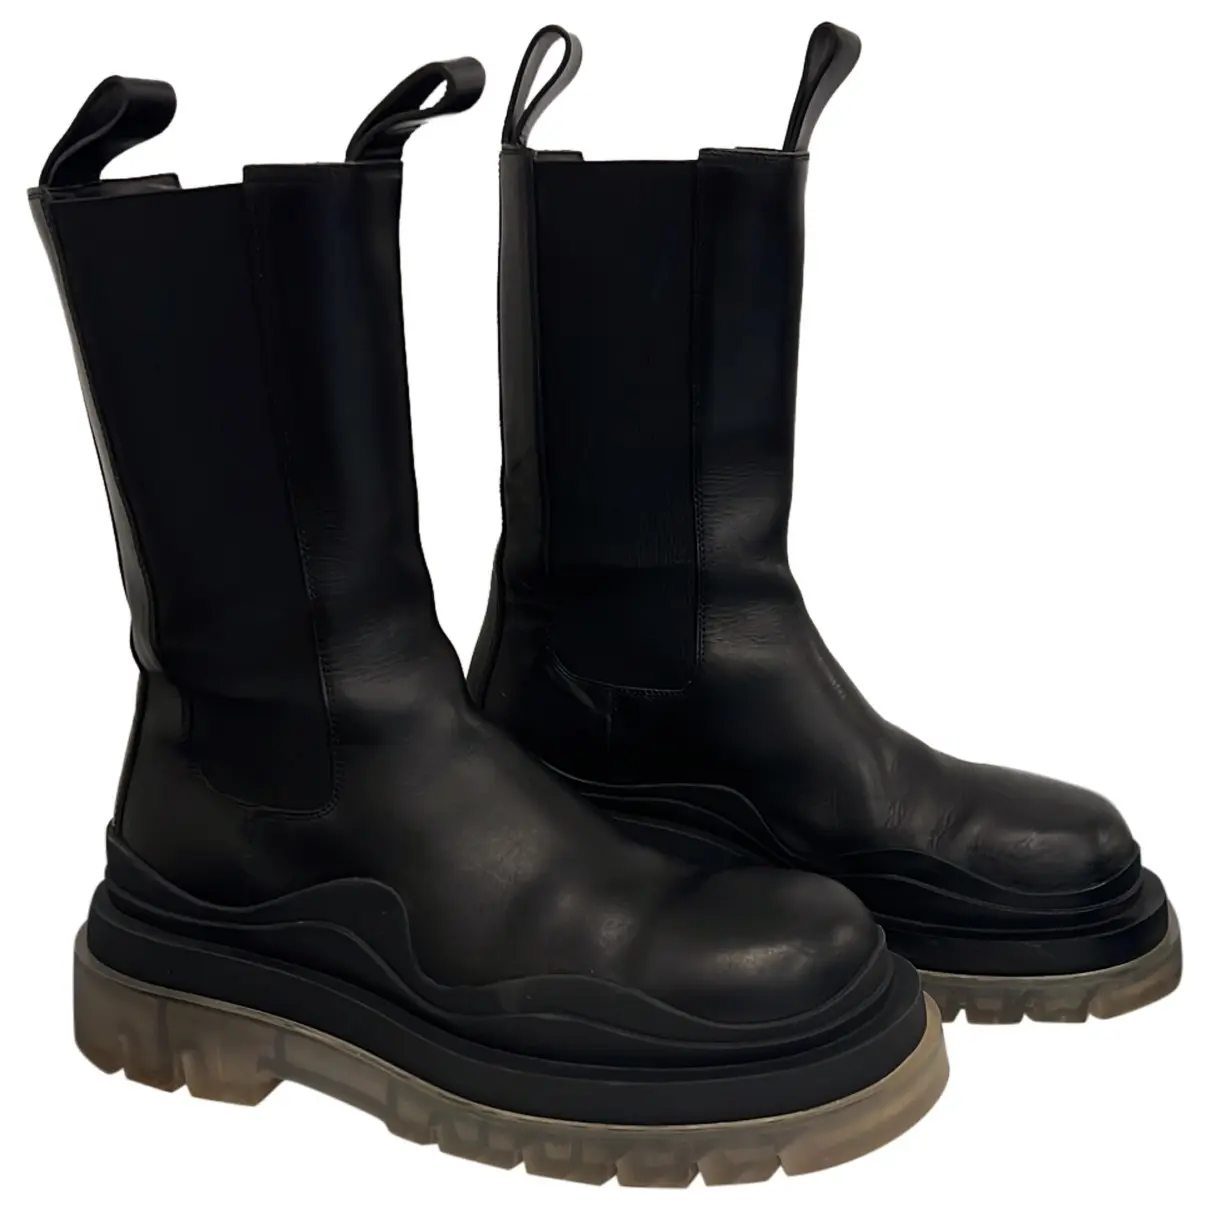 Tire leather biker boots